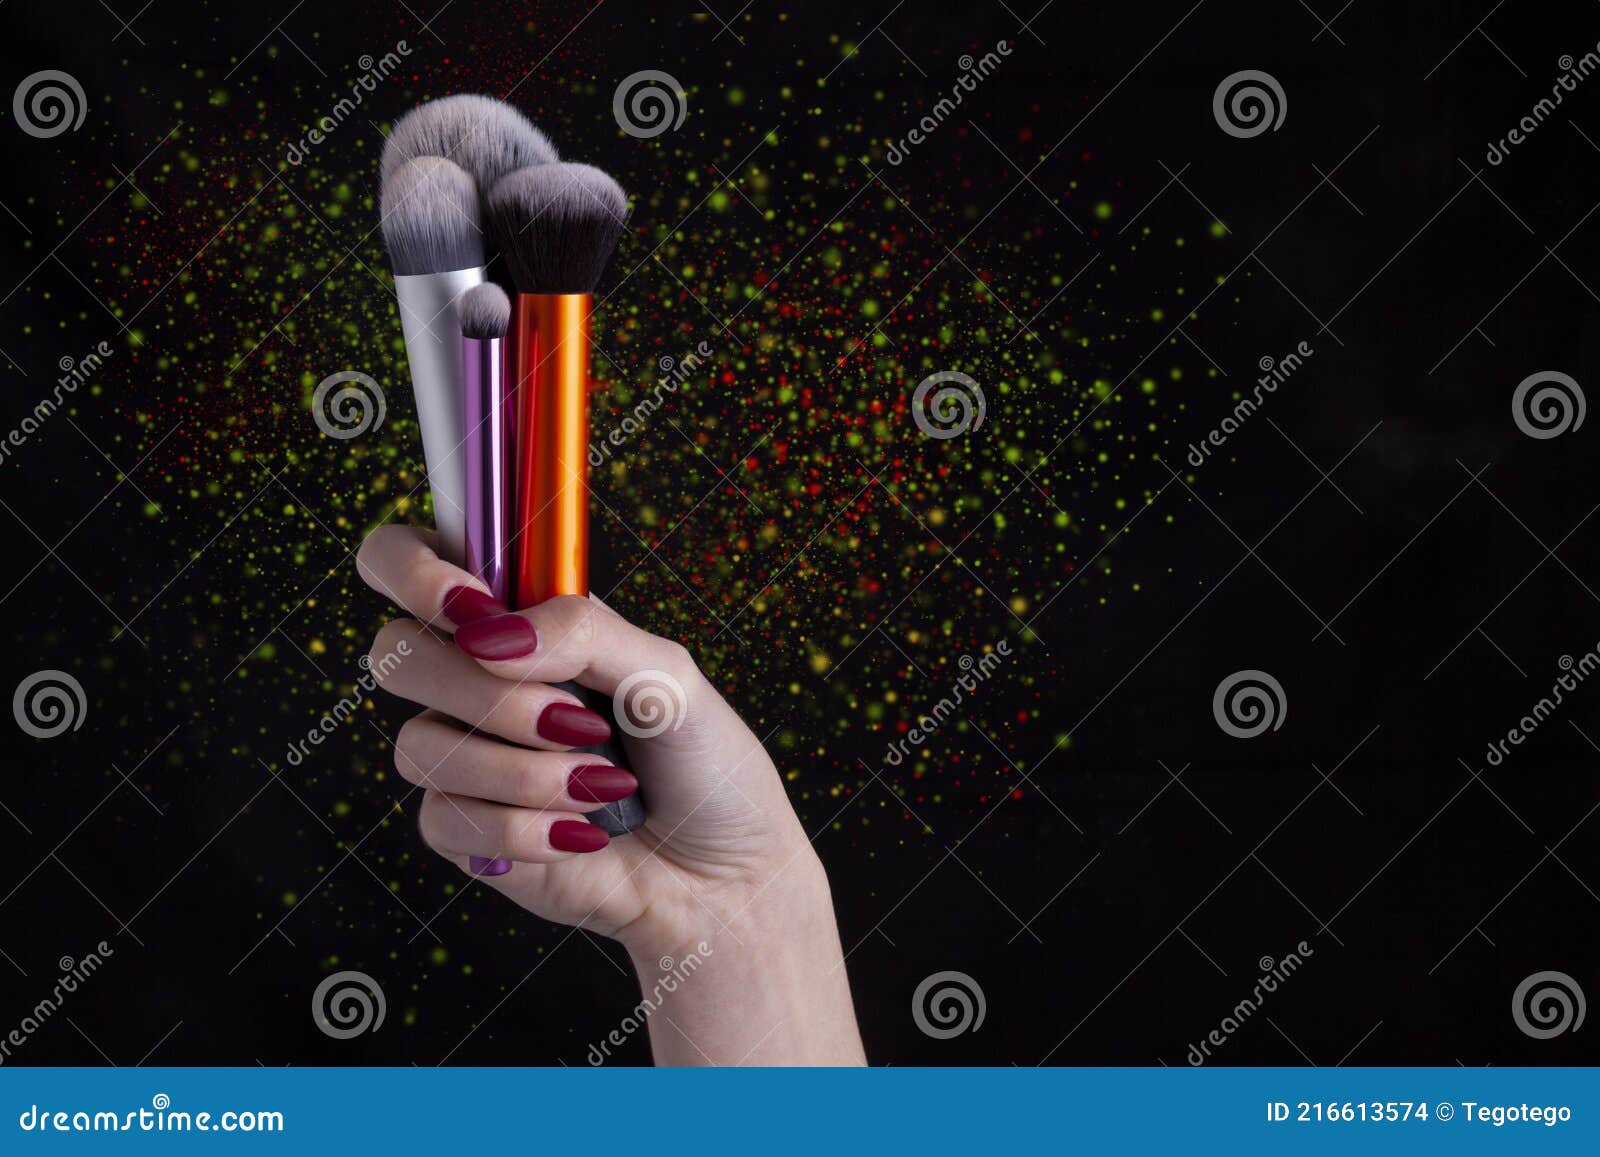 woman hand holding make-up brushes with powder explosion